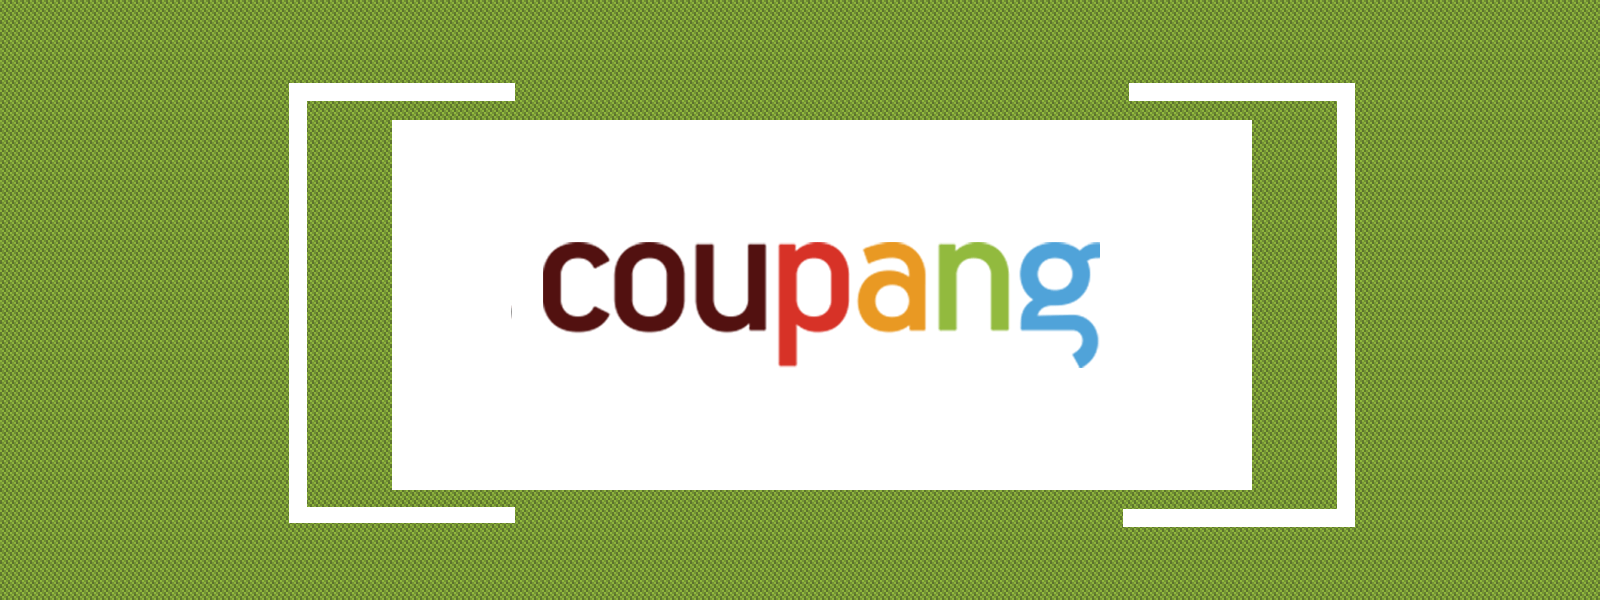 Coupang Logo - How to Sell on Coupang Marketplace Integration - CedCommerce